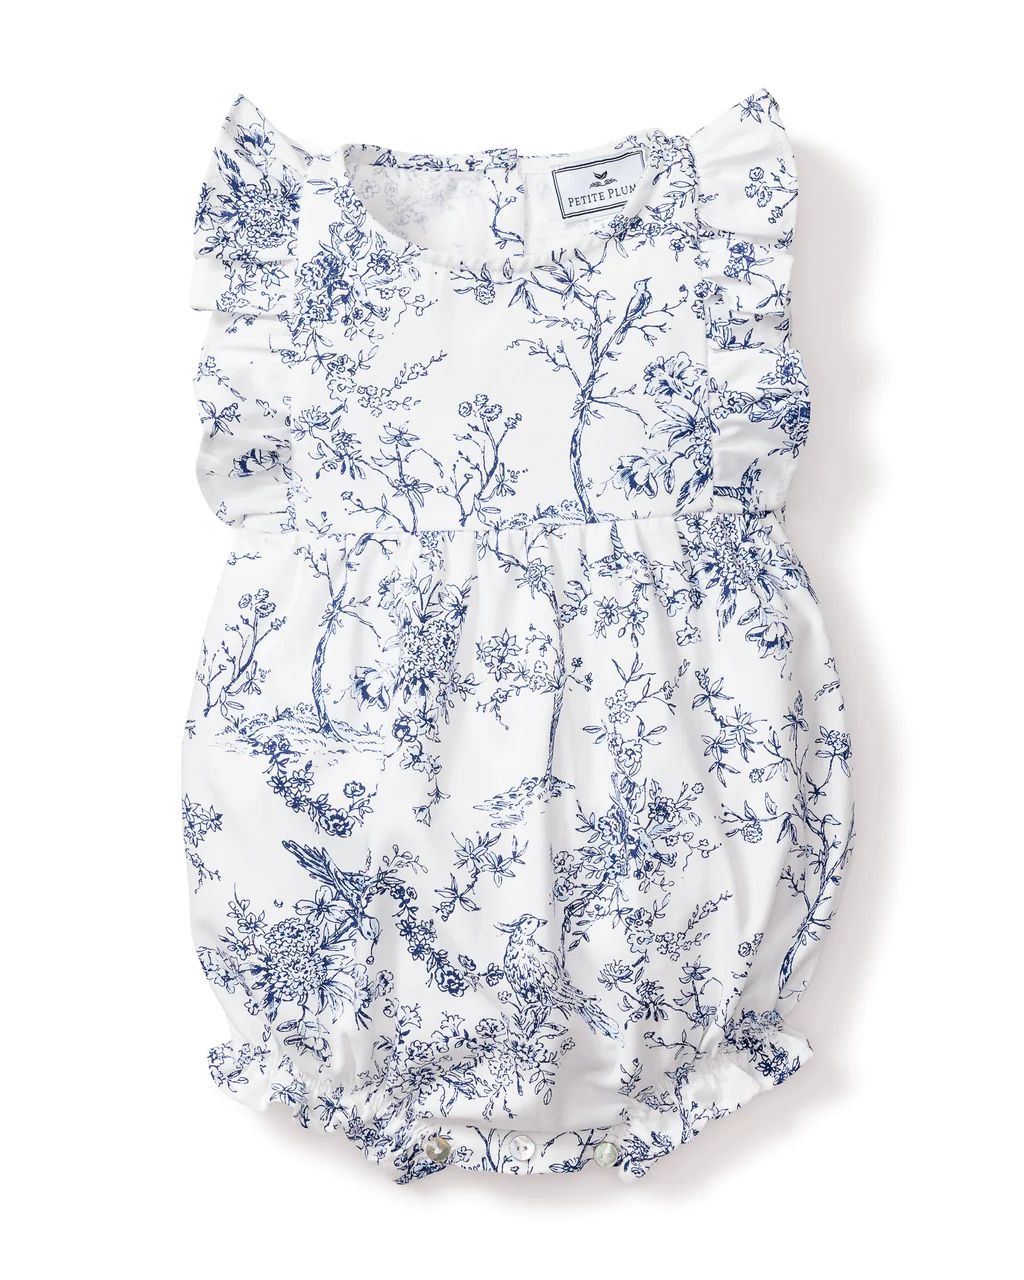 Baby's Twill Ruffled Romper in Timeless Toile | Petite Plume